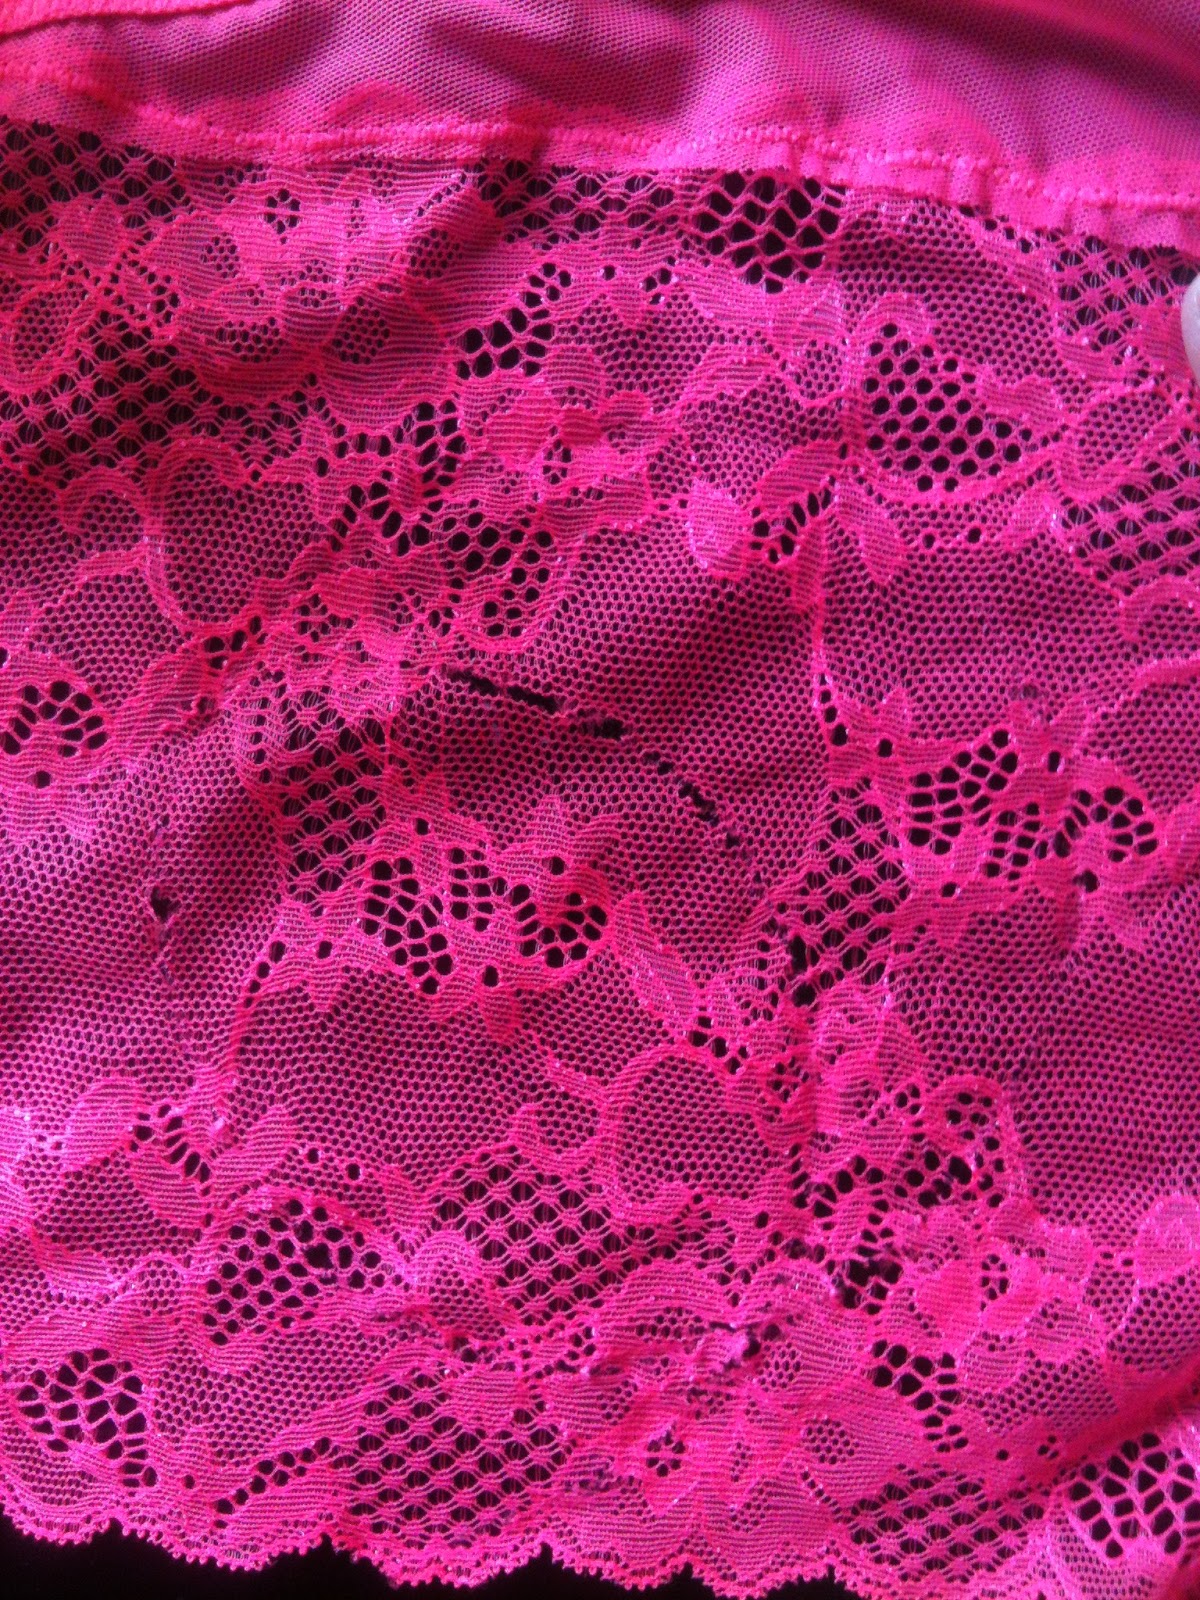 Material Knowledge: Suitable fabric for lingerie